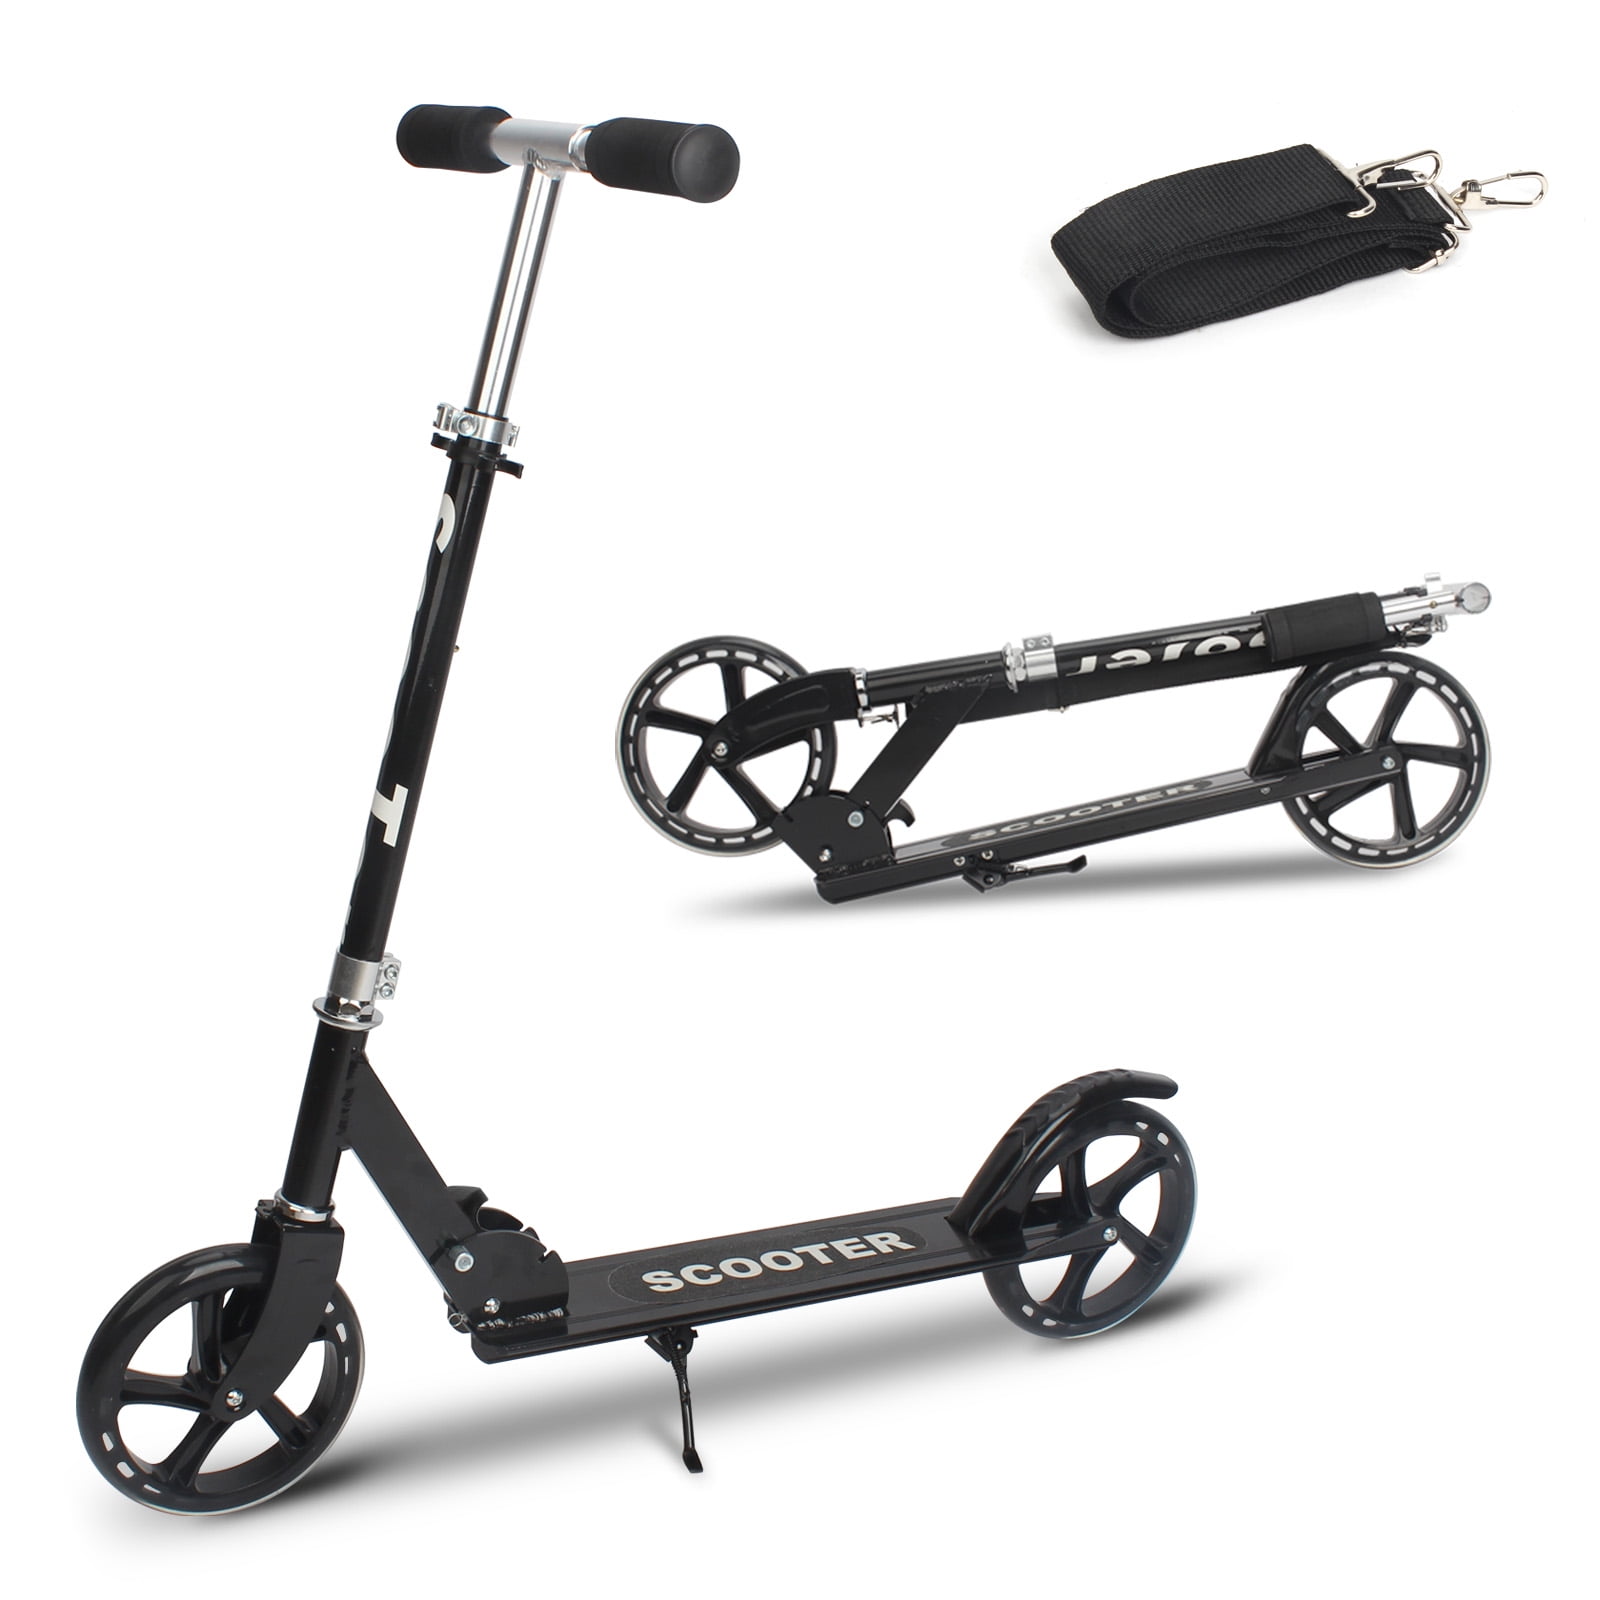 Adult City Suspension Push Kick Scooter Folding Large 200mm Wheels Birthday Gift 